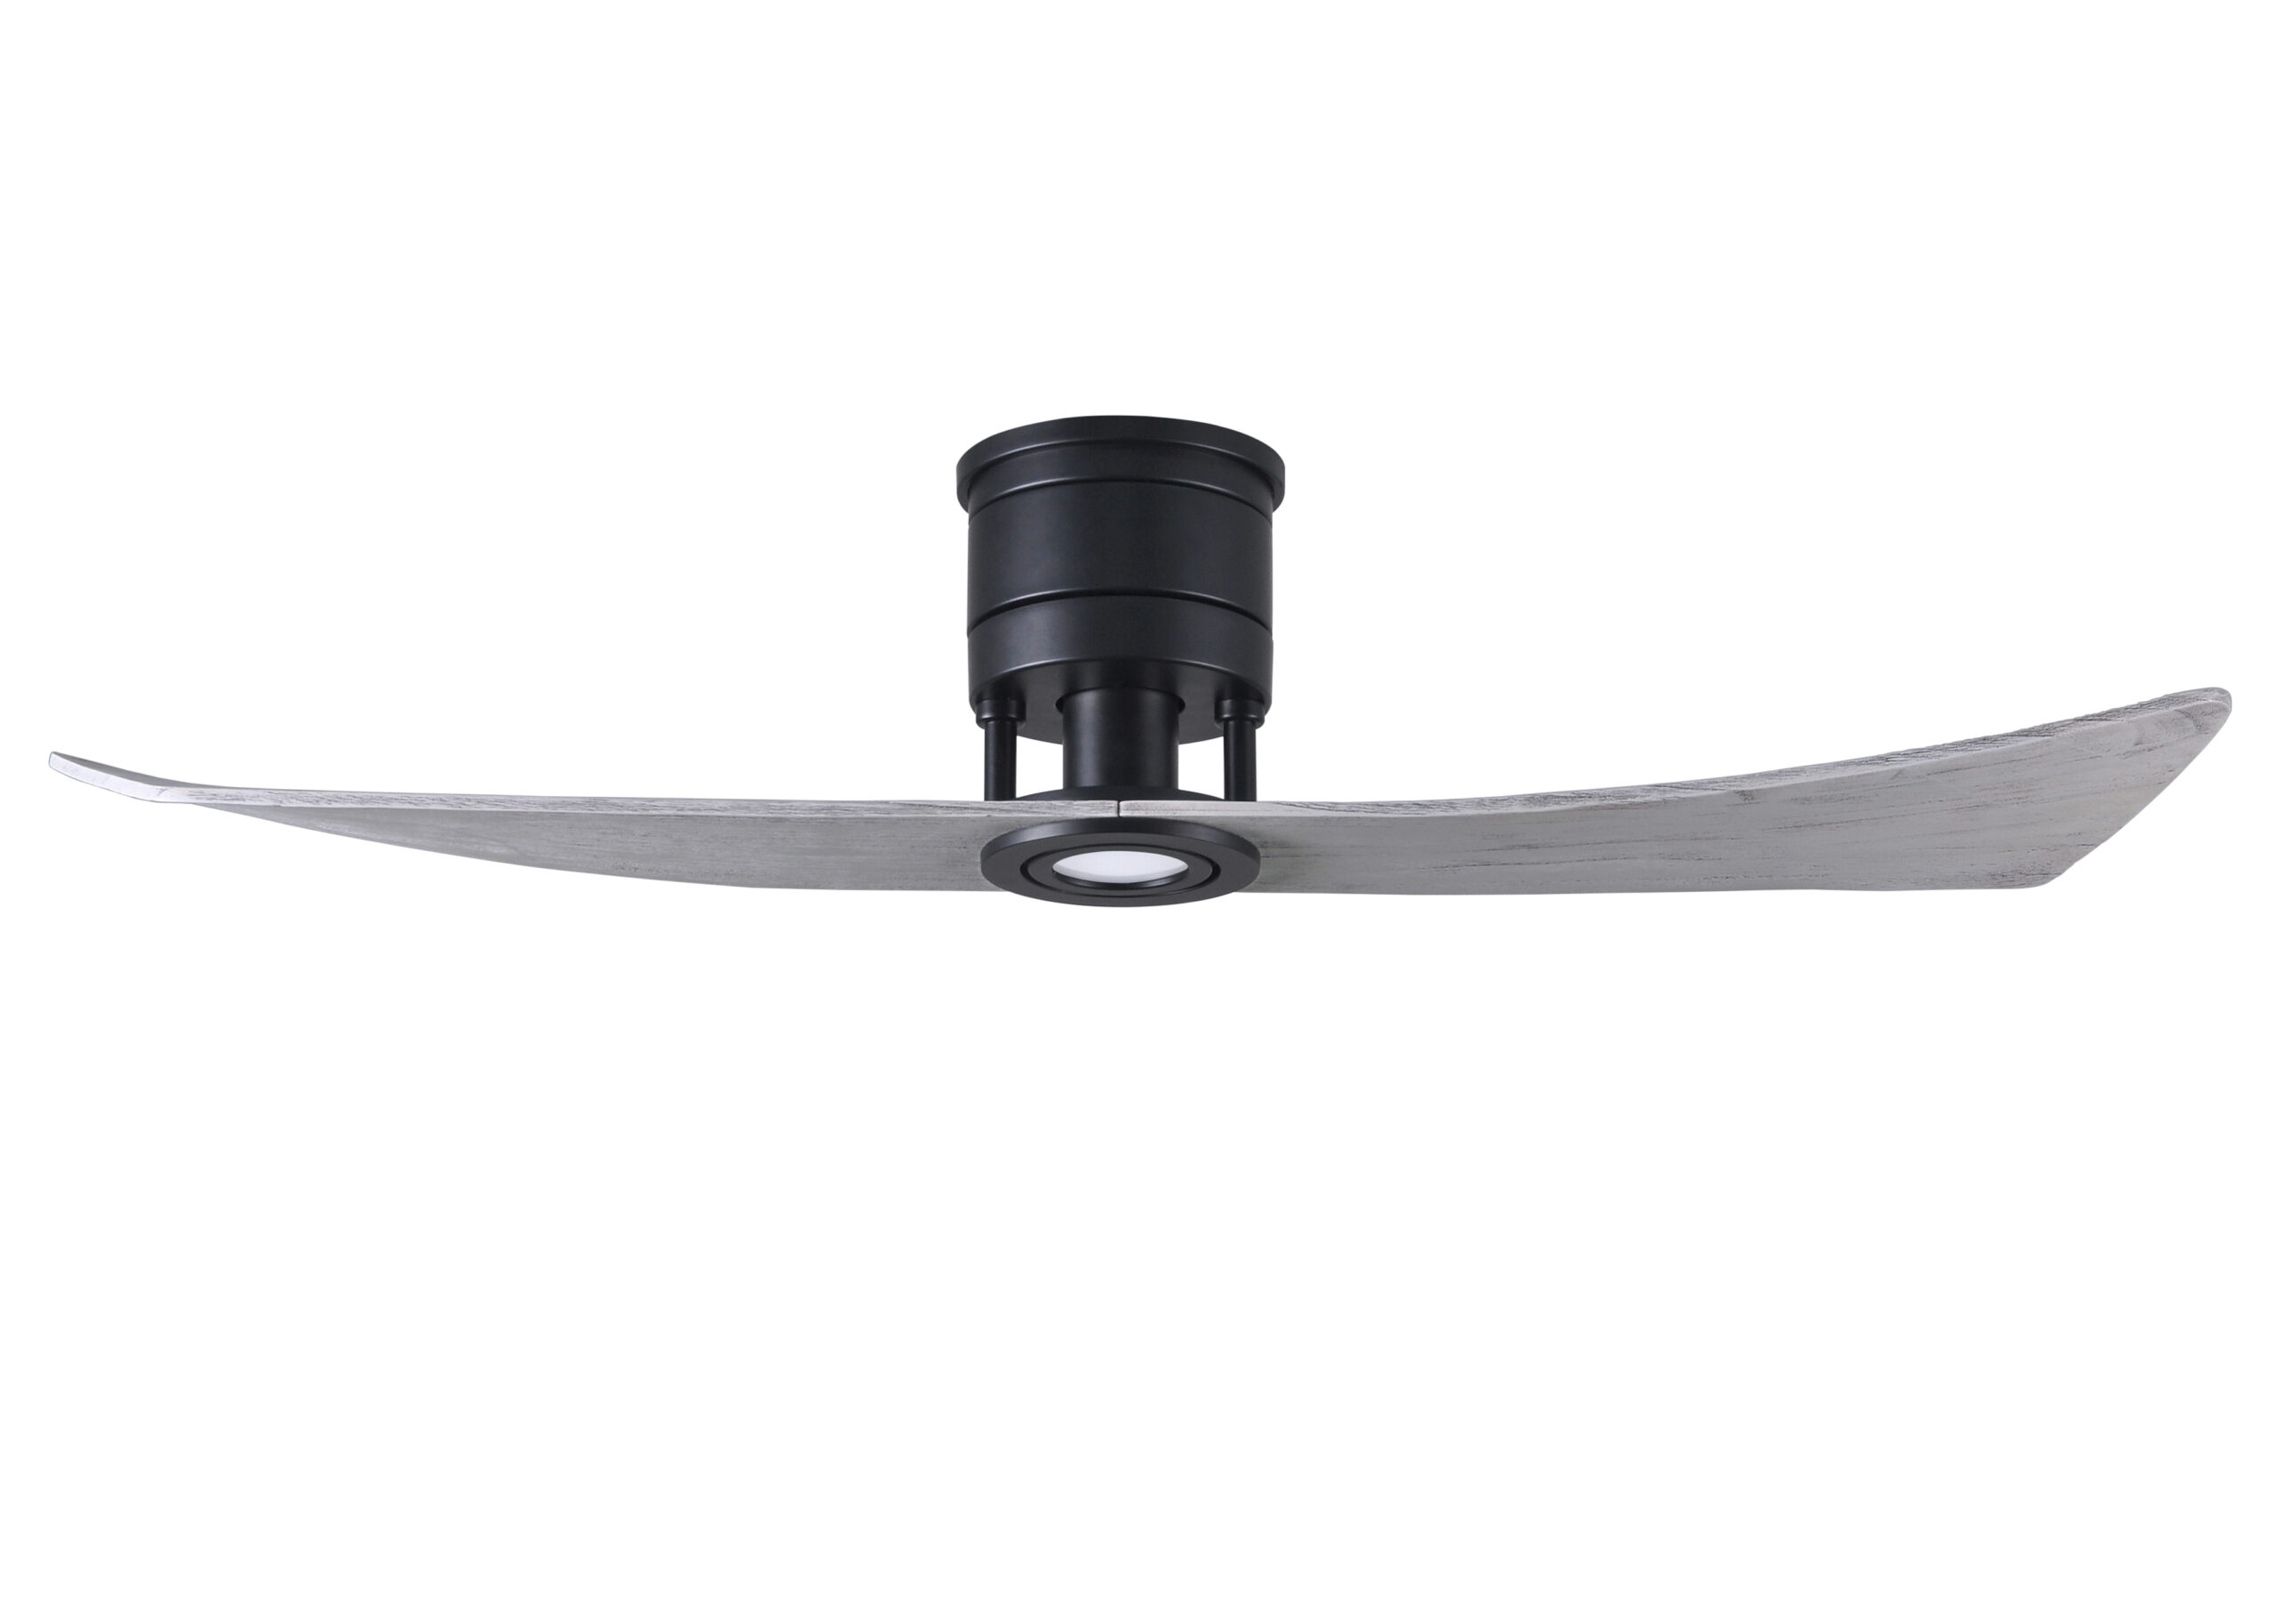 Lindsay 6-speed ceiling fan in Matte Black finish with 52